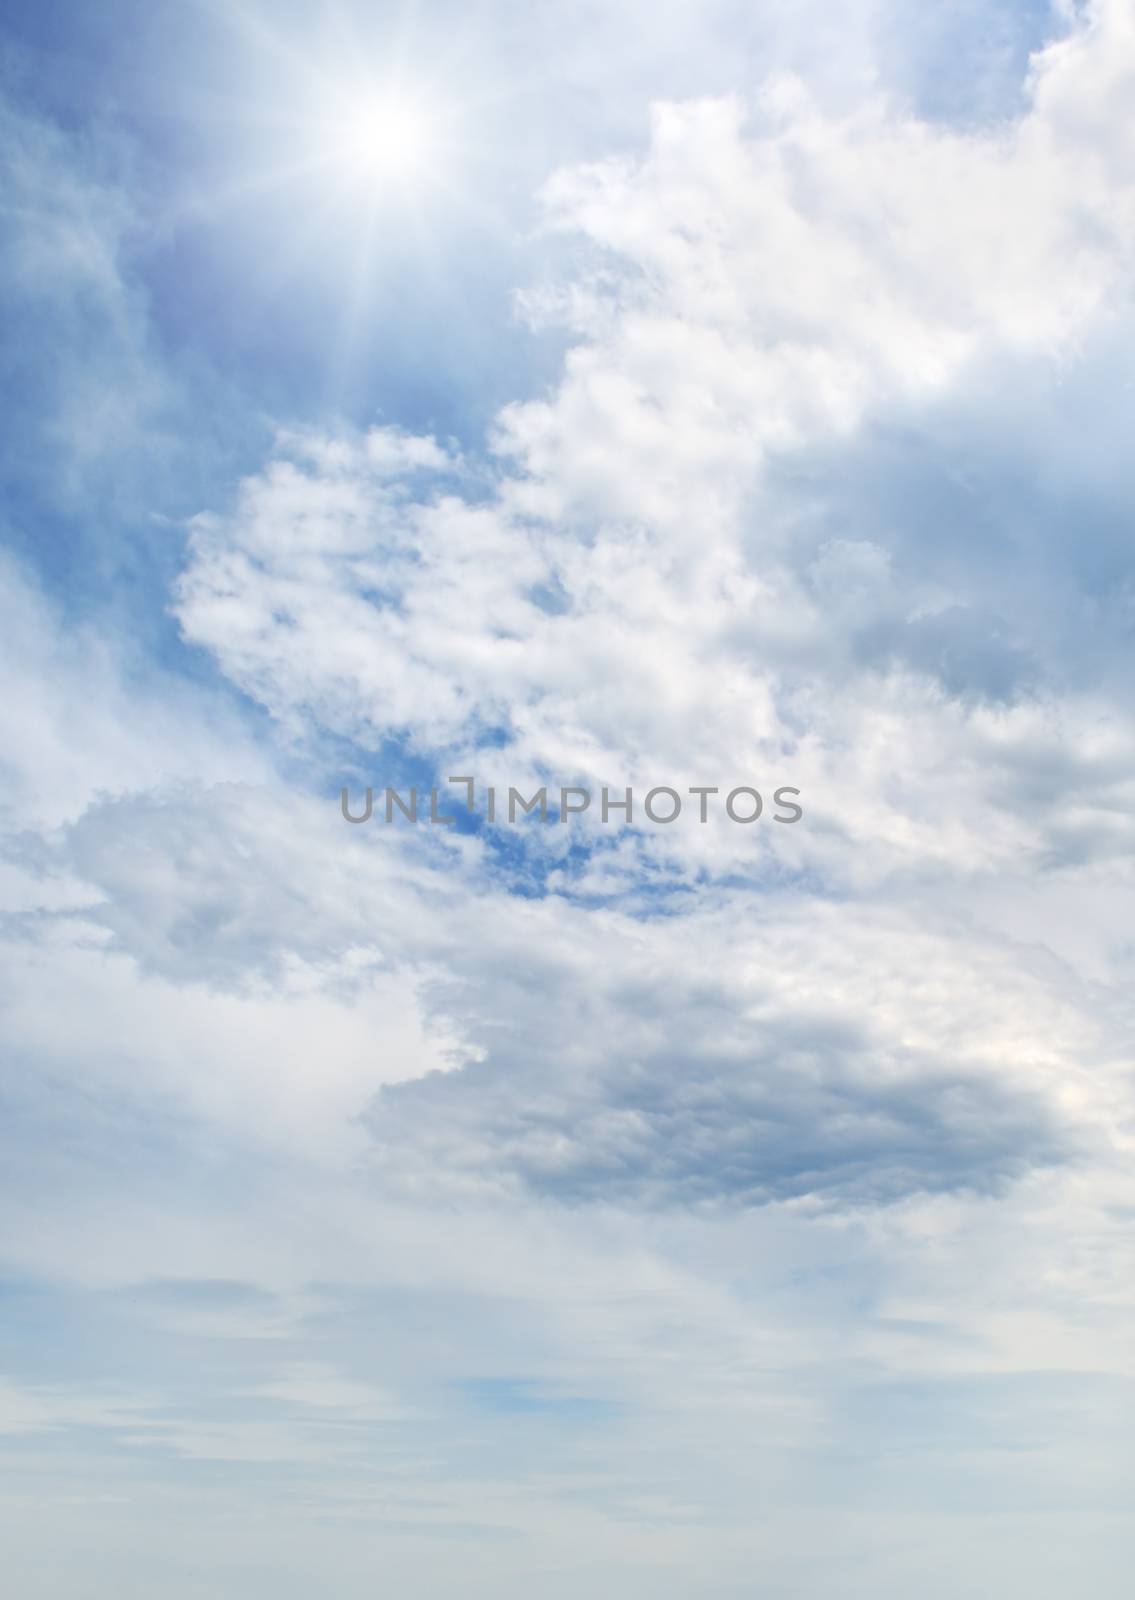    sun on blue sky with white clouds                                 